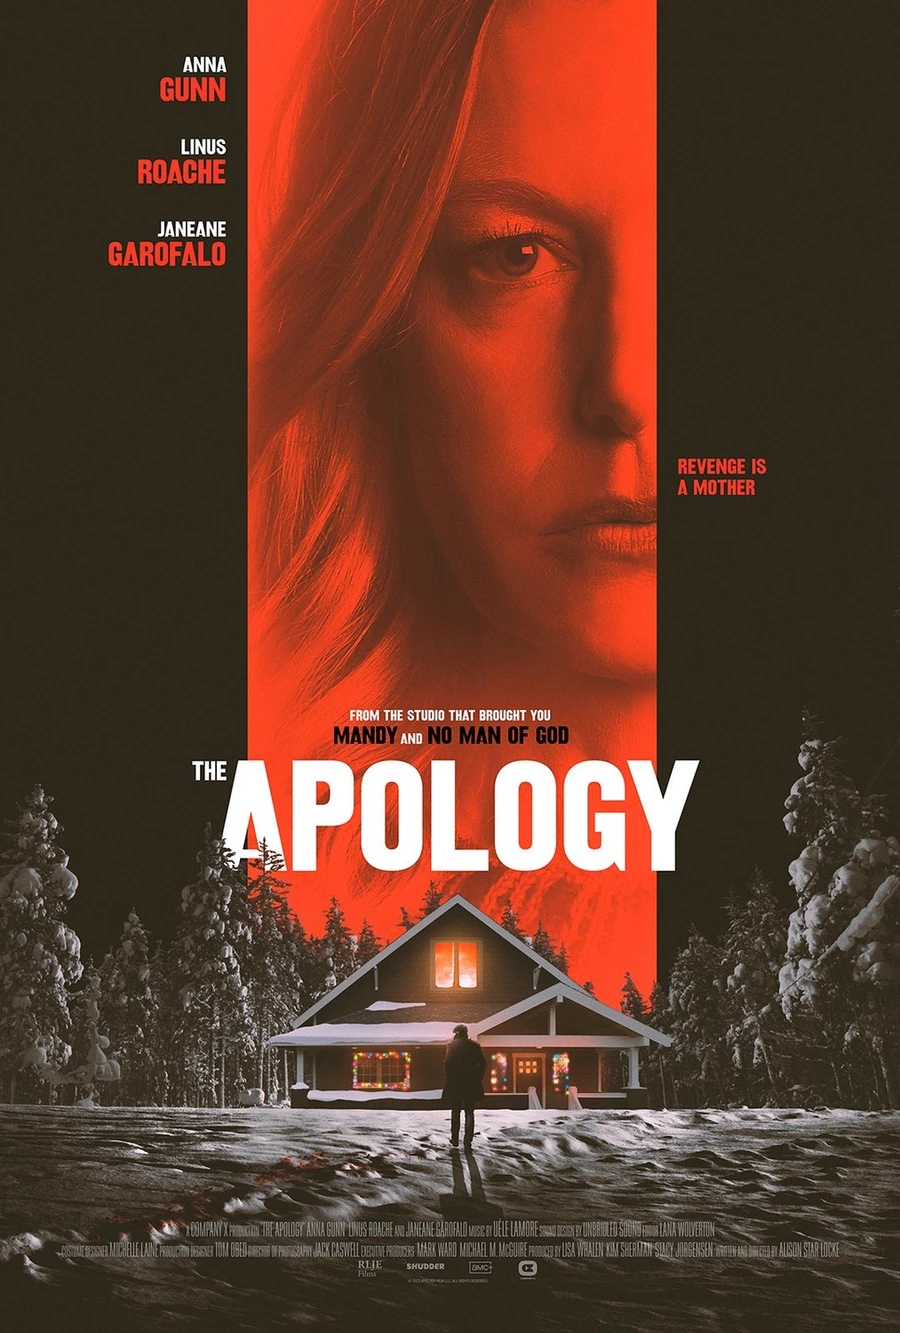 Poster for the thriller «The Apology», starring Anna Gunn.. 20 years after the disappearance of her daughter, Darlene, a former alcoholic, is preparing for a family Christmas dinner with the help of her friend and neighbor Gretchen. Late in the evening, on Christmas Eve, an uninvited guest appears on her doorstep - her sister's ex-husband, bringing with him nostalgic gifts and a heavy secret. Soon Darlene finds herself trapped between rationality and ruthless instinct. Outside the door, a storm rages, and inside, a battle of wits begins that escalates into a brutal revenge game.
The film will be released on the streaming service "Shudder" on December 16.